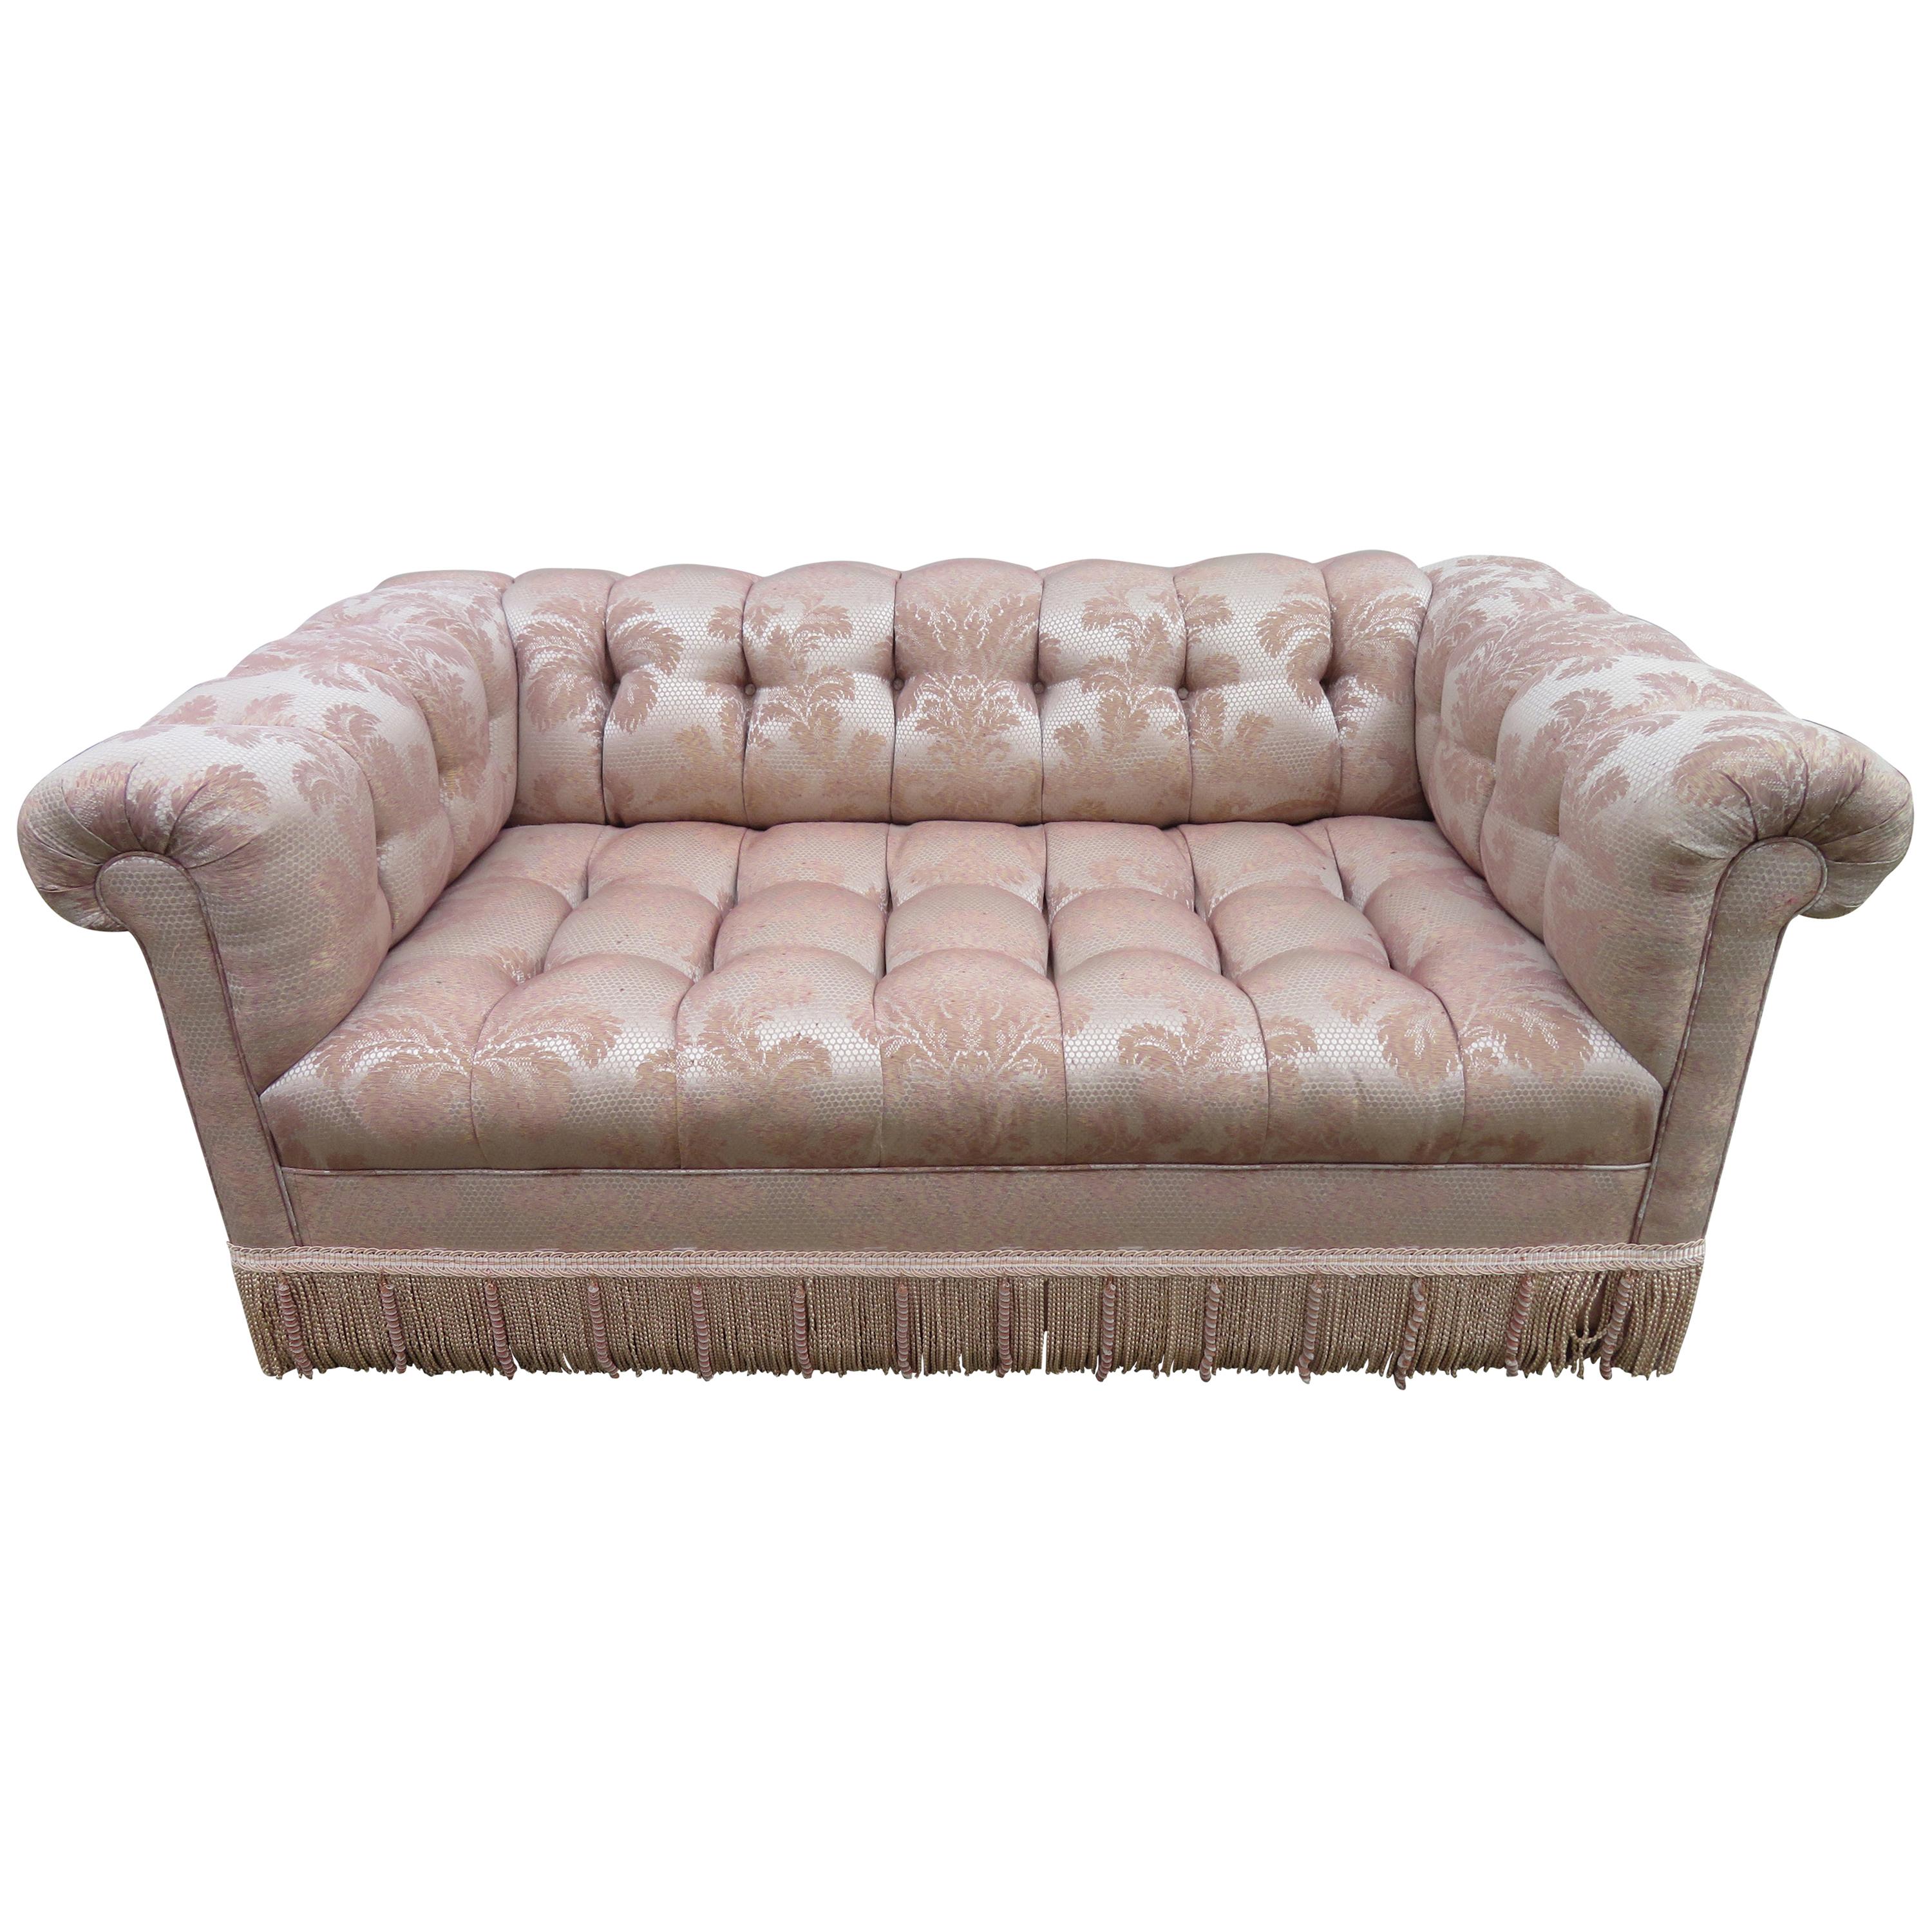 Magnificent Paul Evans Directional Biscuit Tufted Party Loveseat Sofa Modern